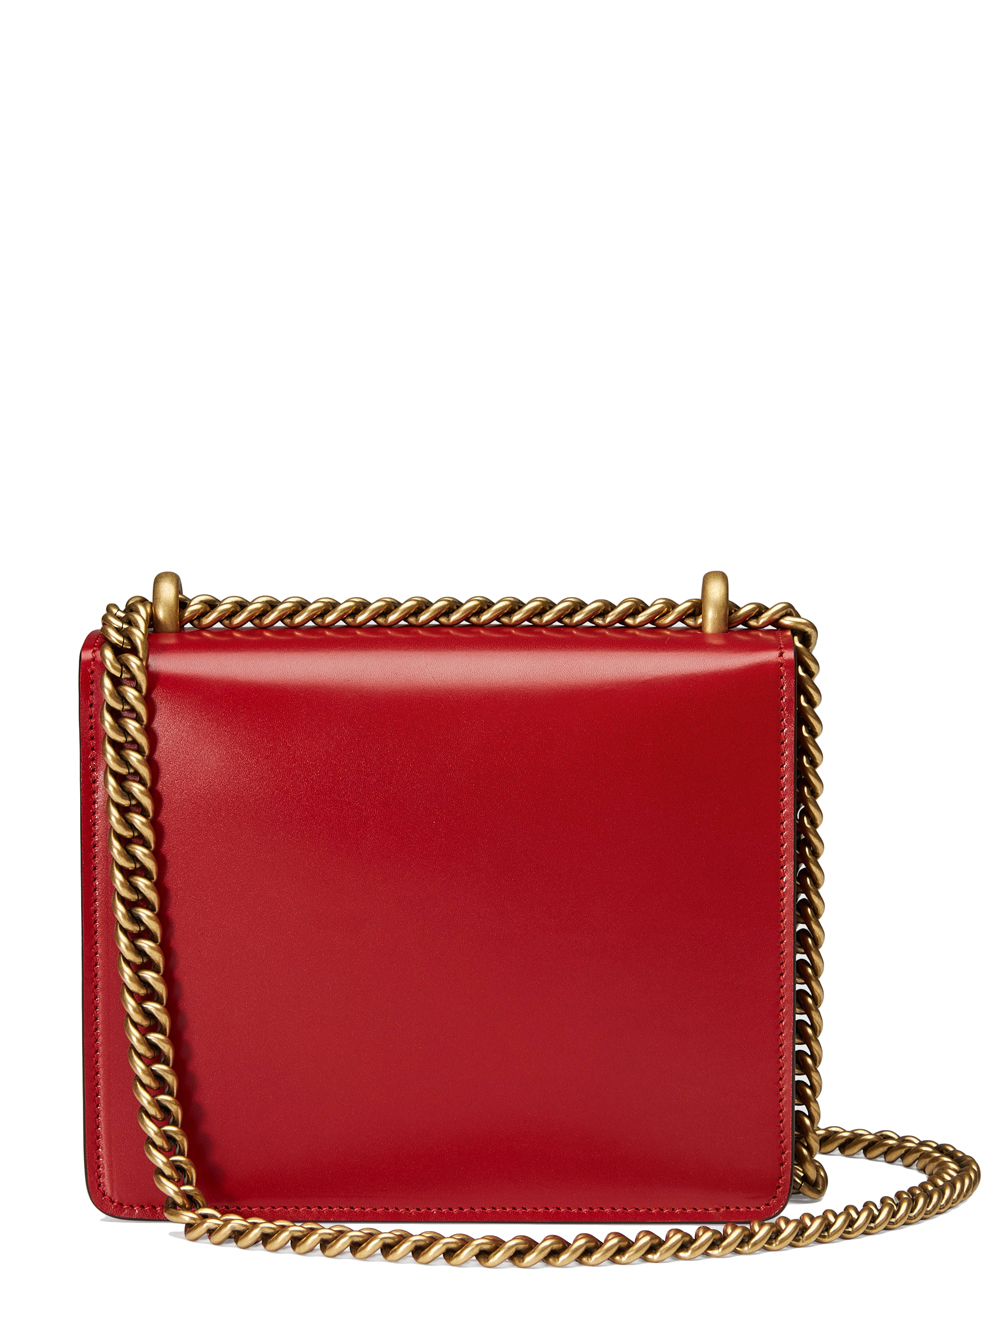 Lyst - Gucci Small Marmont Bag - Red in Red